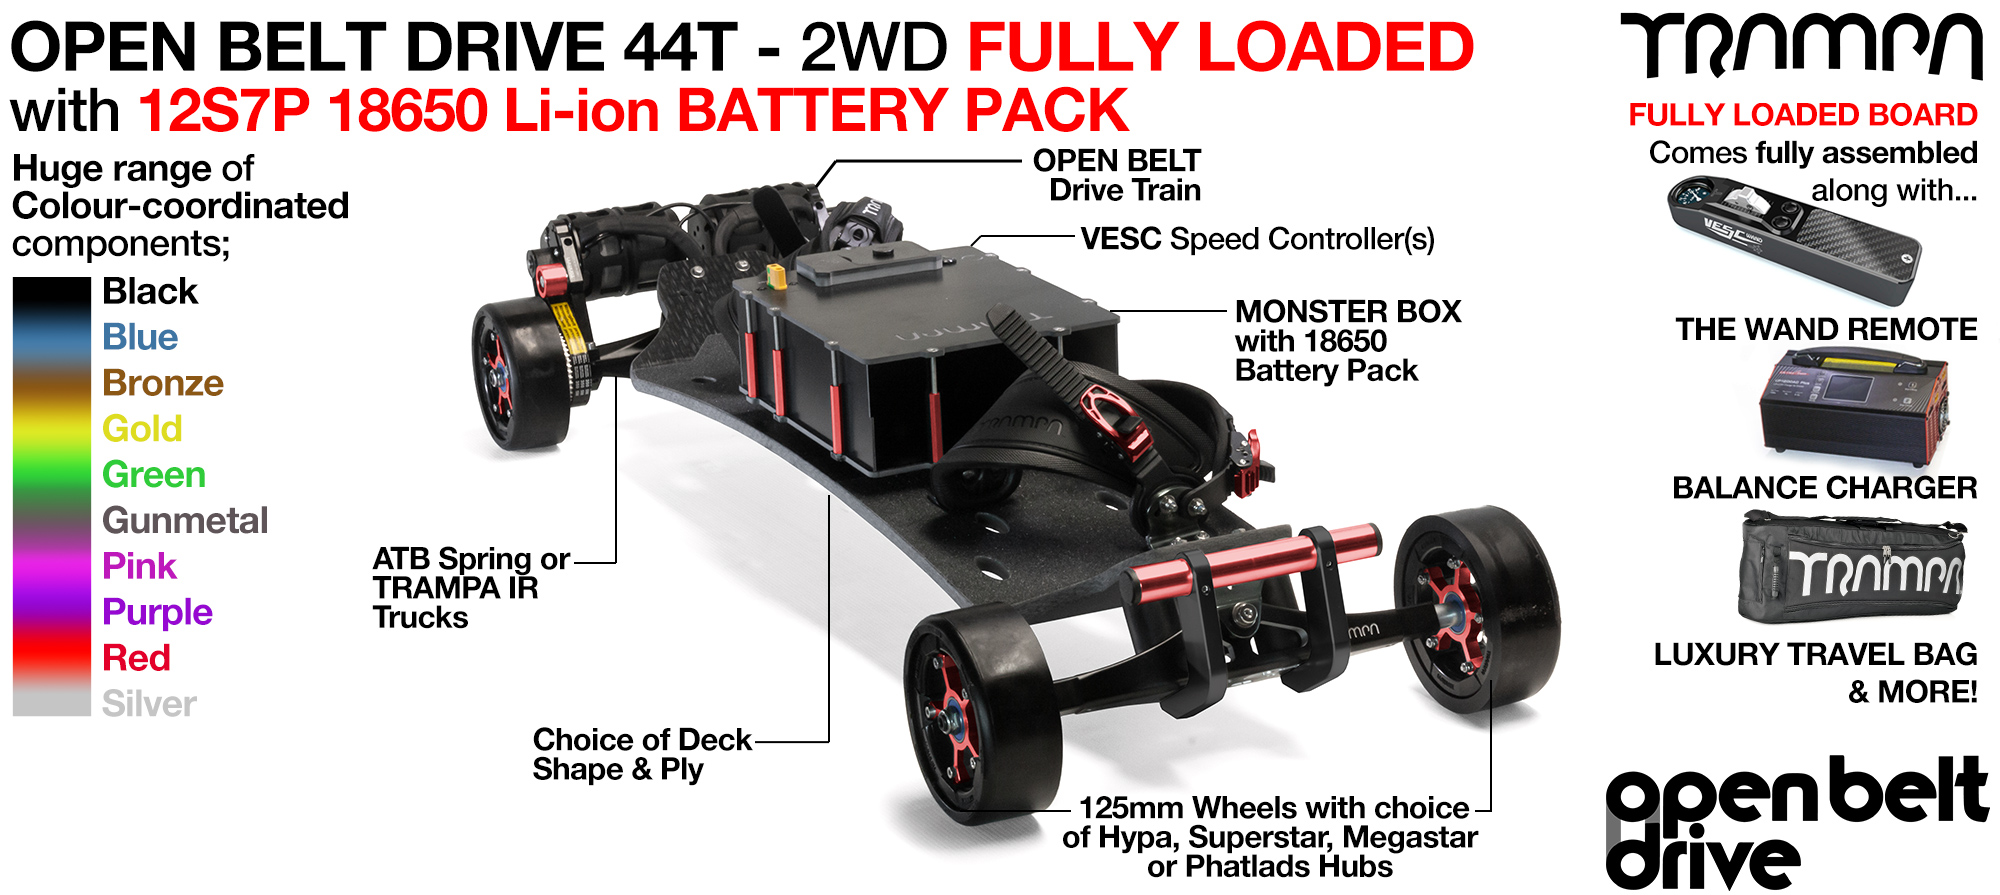 2WD 66T Open Belt Drive TRAMPA Electric Mountainboard with 125mm GUMMIES Giant Longboard Wheels & 44 Tooth Pulleys - FULLY LOADED 18650 CELL Pack